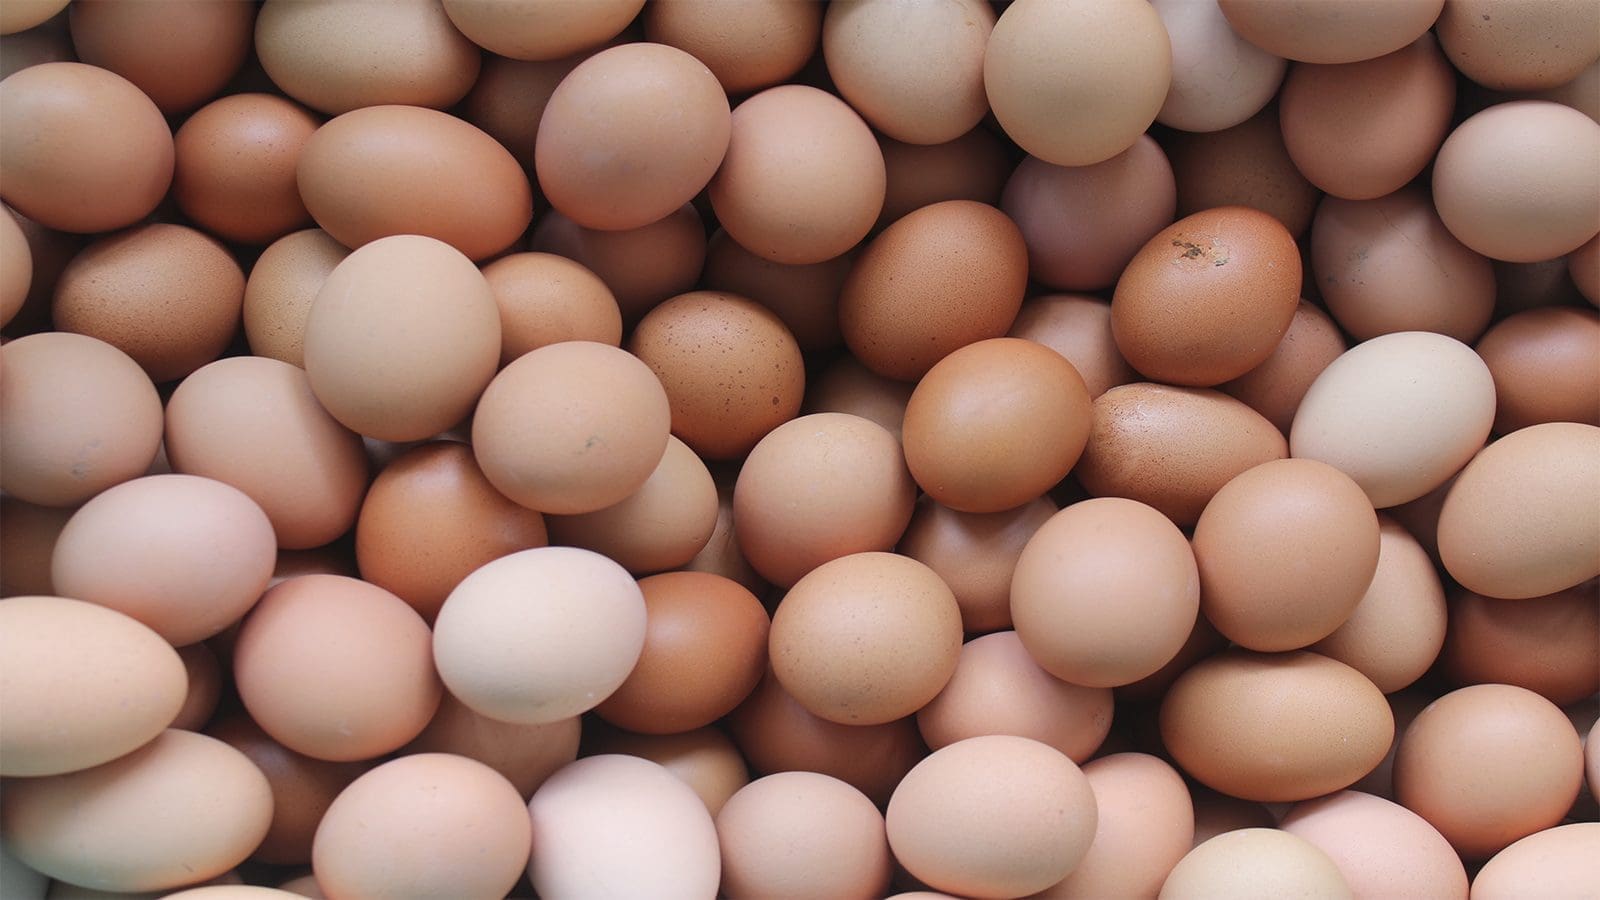 Norway officials petition EU draft rules on shelf life of eggs